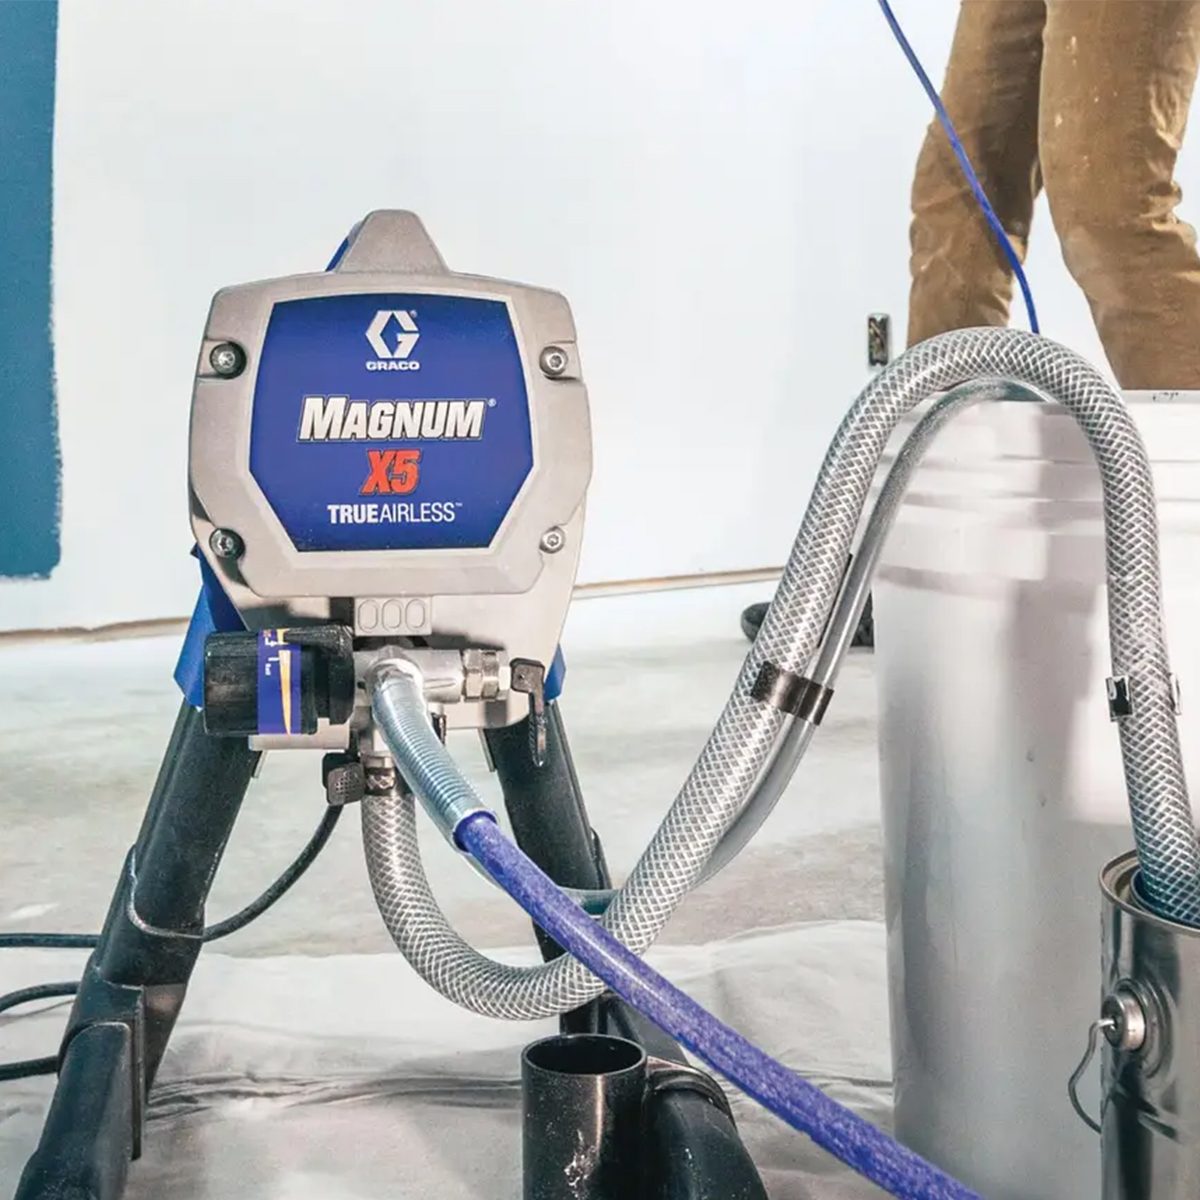 https://www.familyhandyman.com/wp-content/uploads/2023/10/Tackle-Your-Toughest-Projects-with-the-Graco-Airless-Paint-Sprayer_FT_via-amazon.com_.jpg?fit=700%2C1024